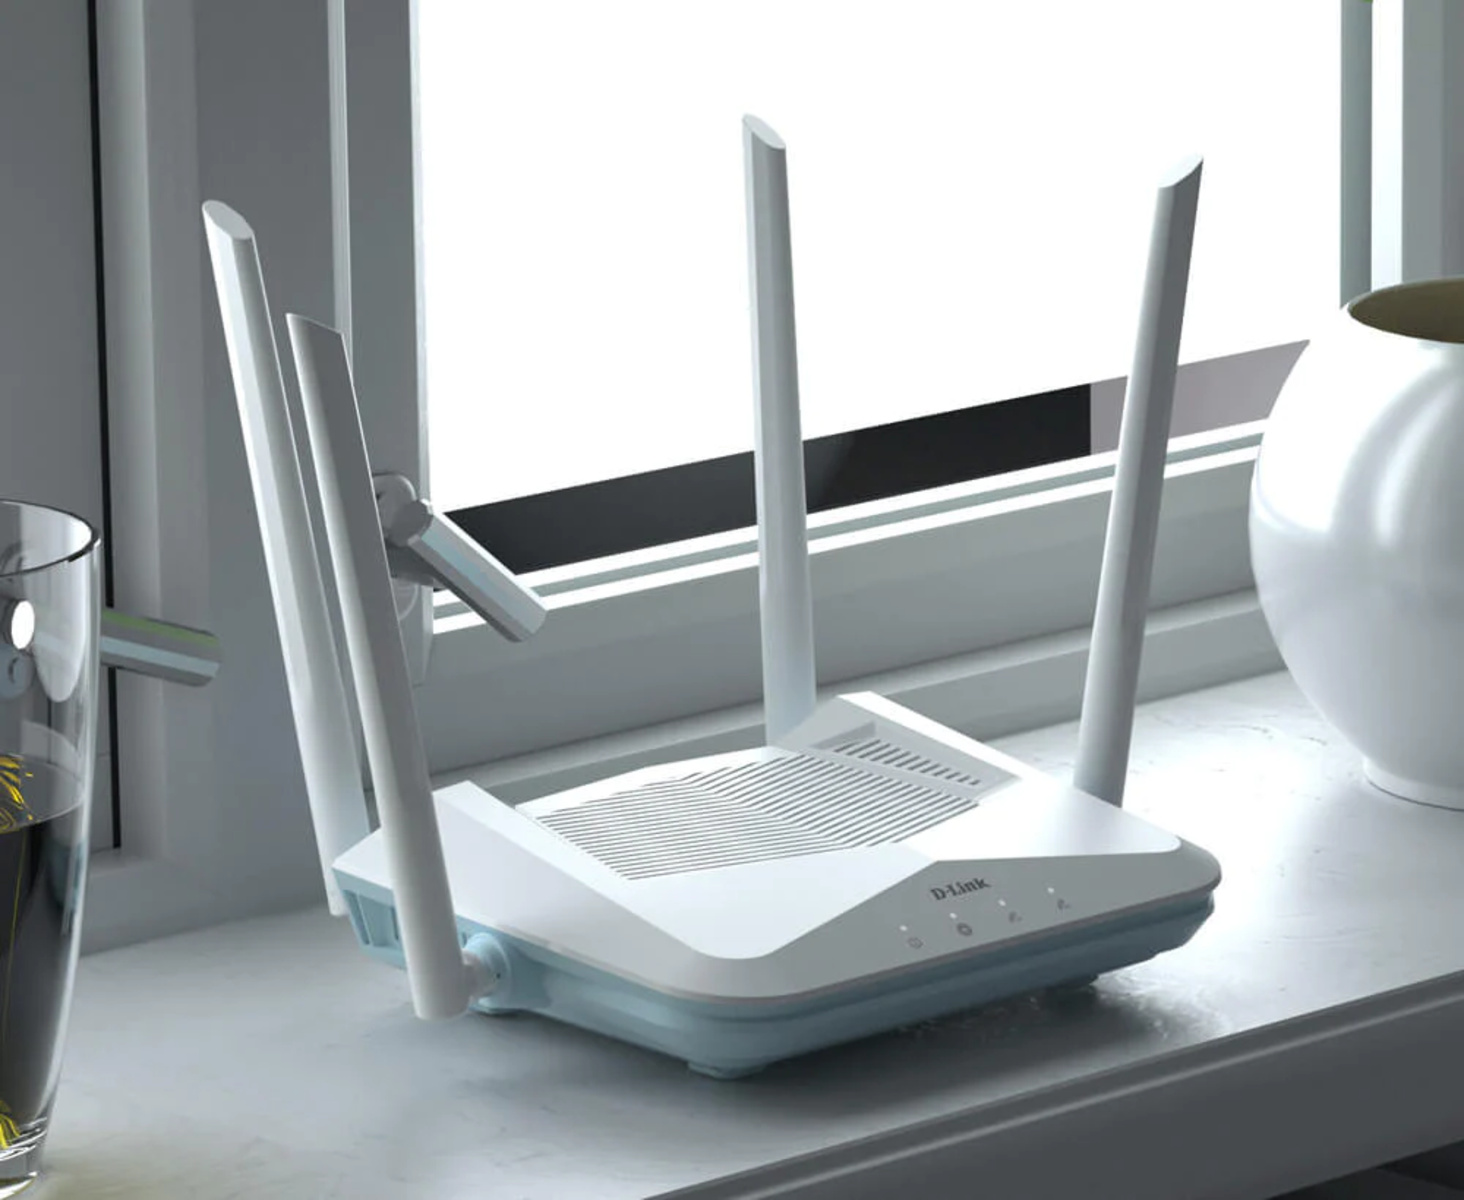 how-to-fix-a-dlink-wireless-router